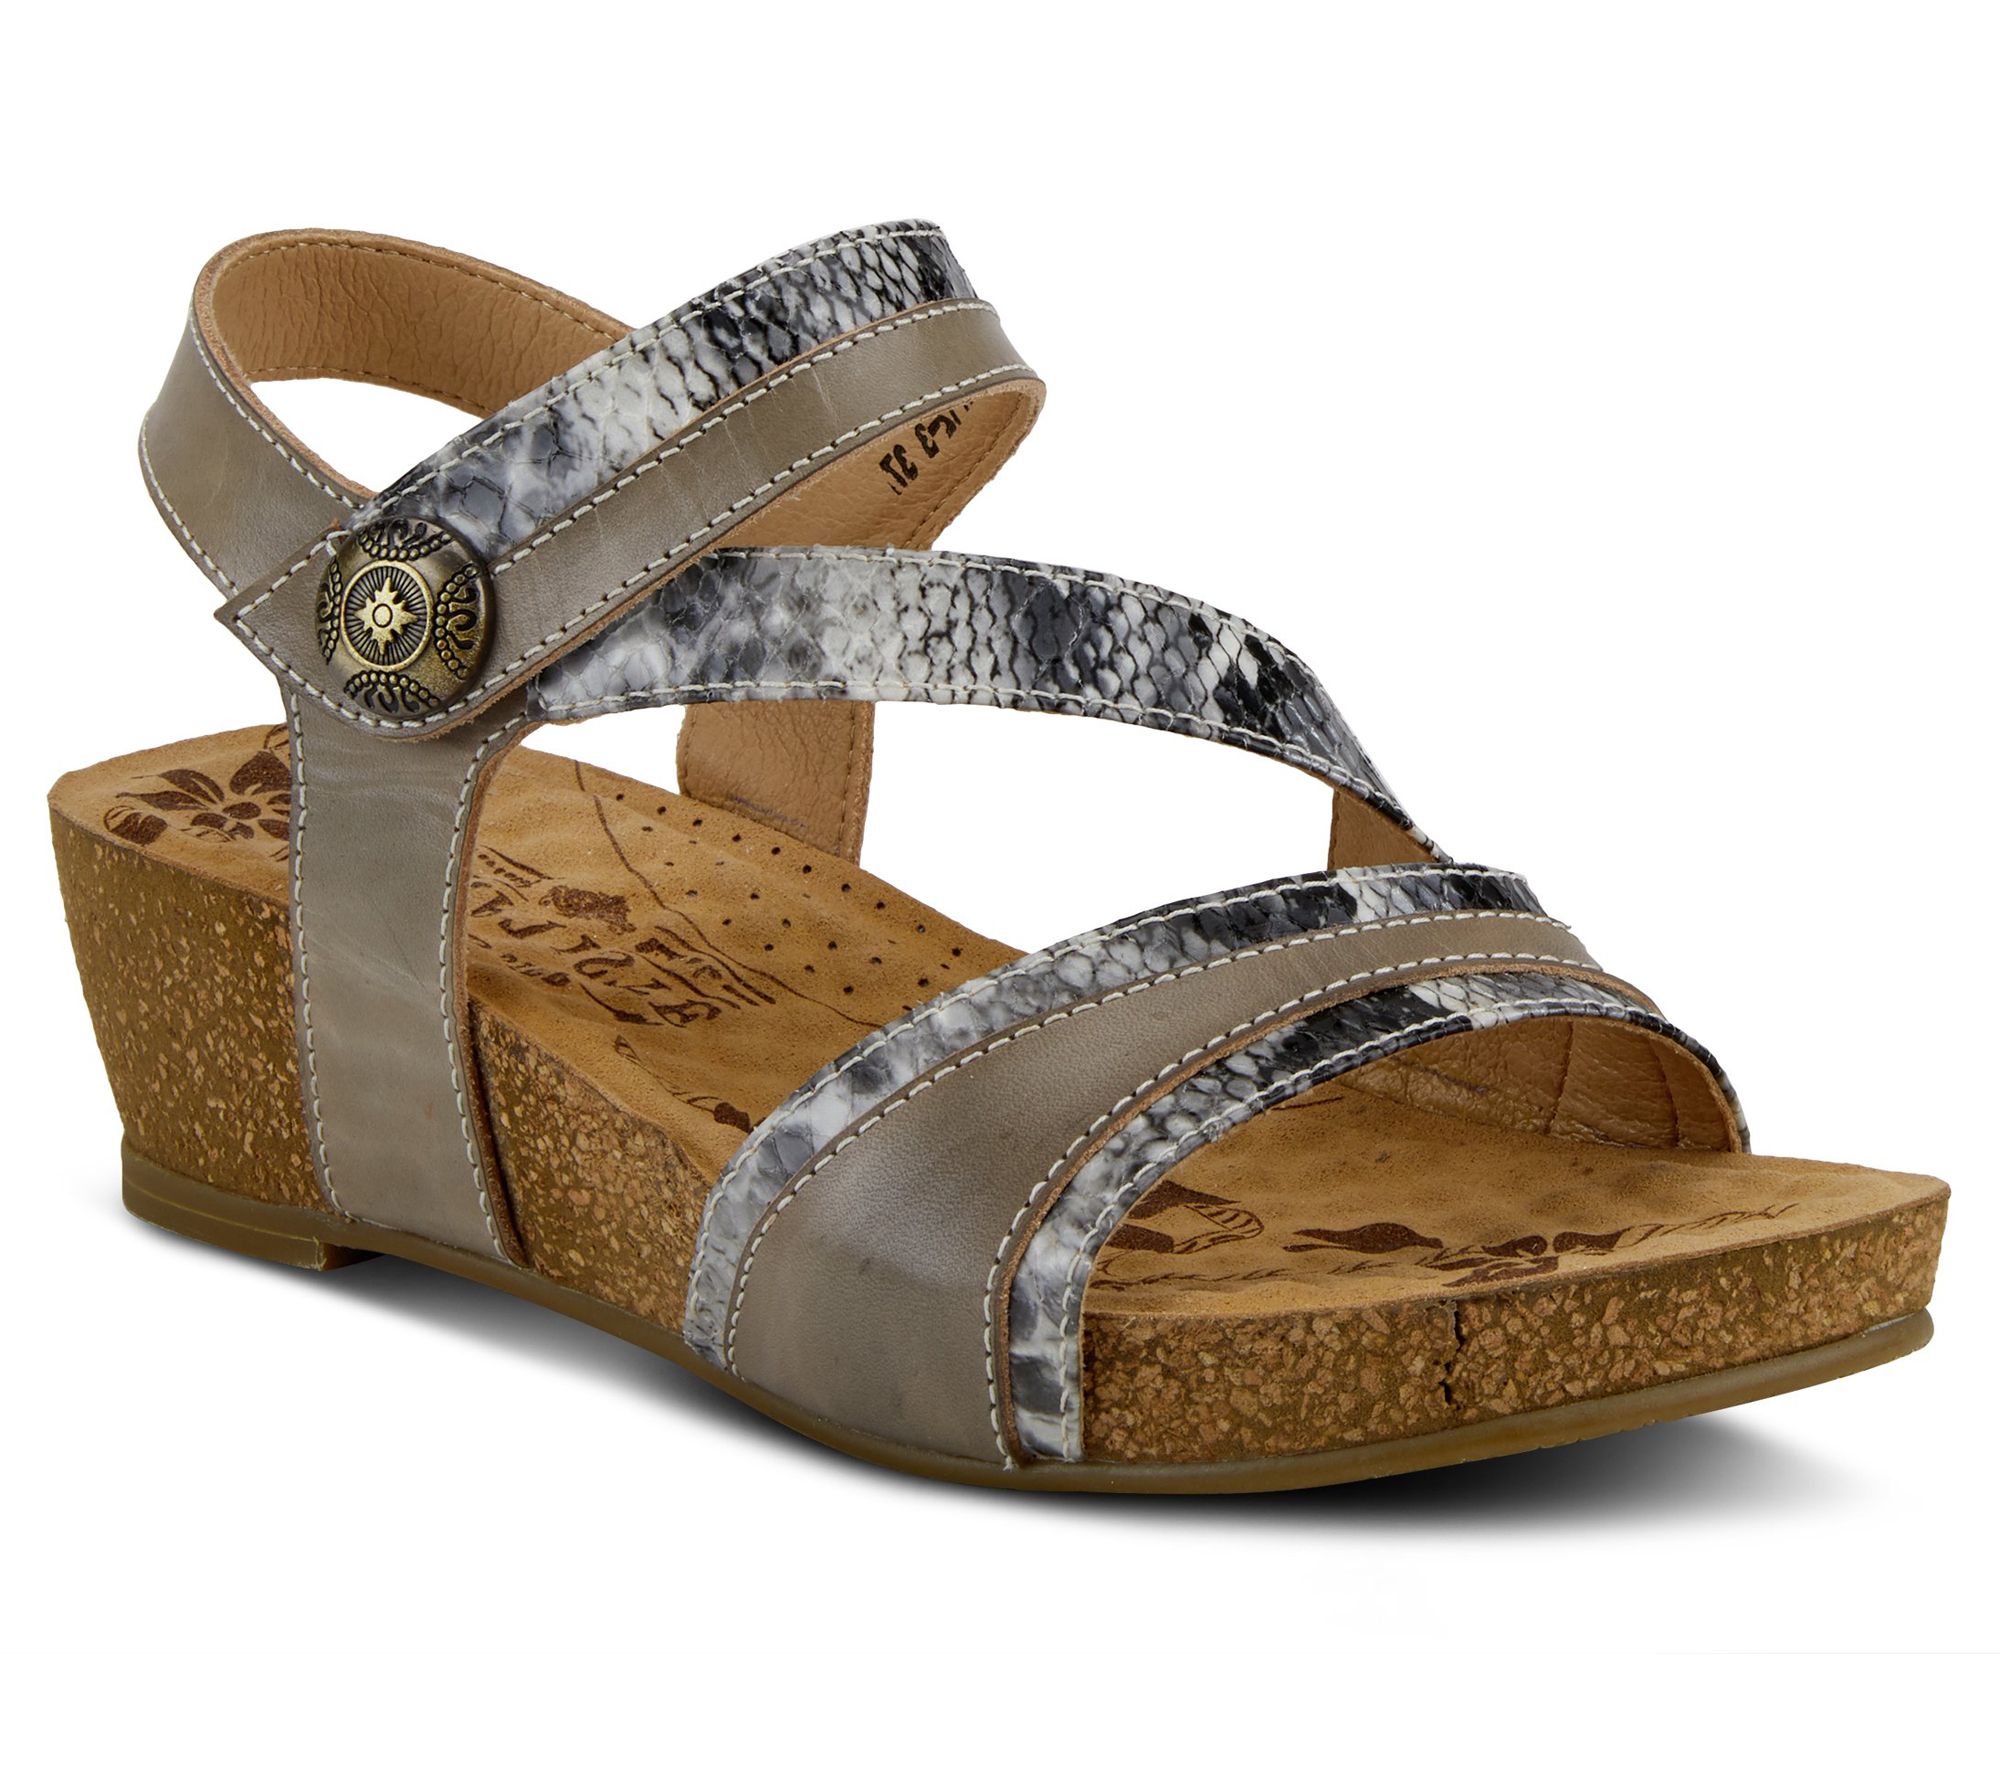 L'Artiste By Spring Step Leather Wedge Sandals- Meera - QVC.com